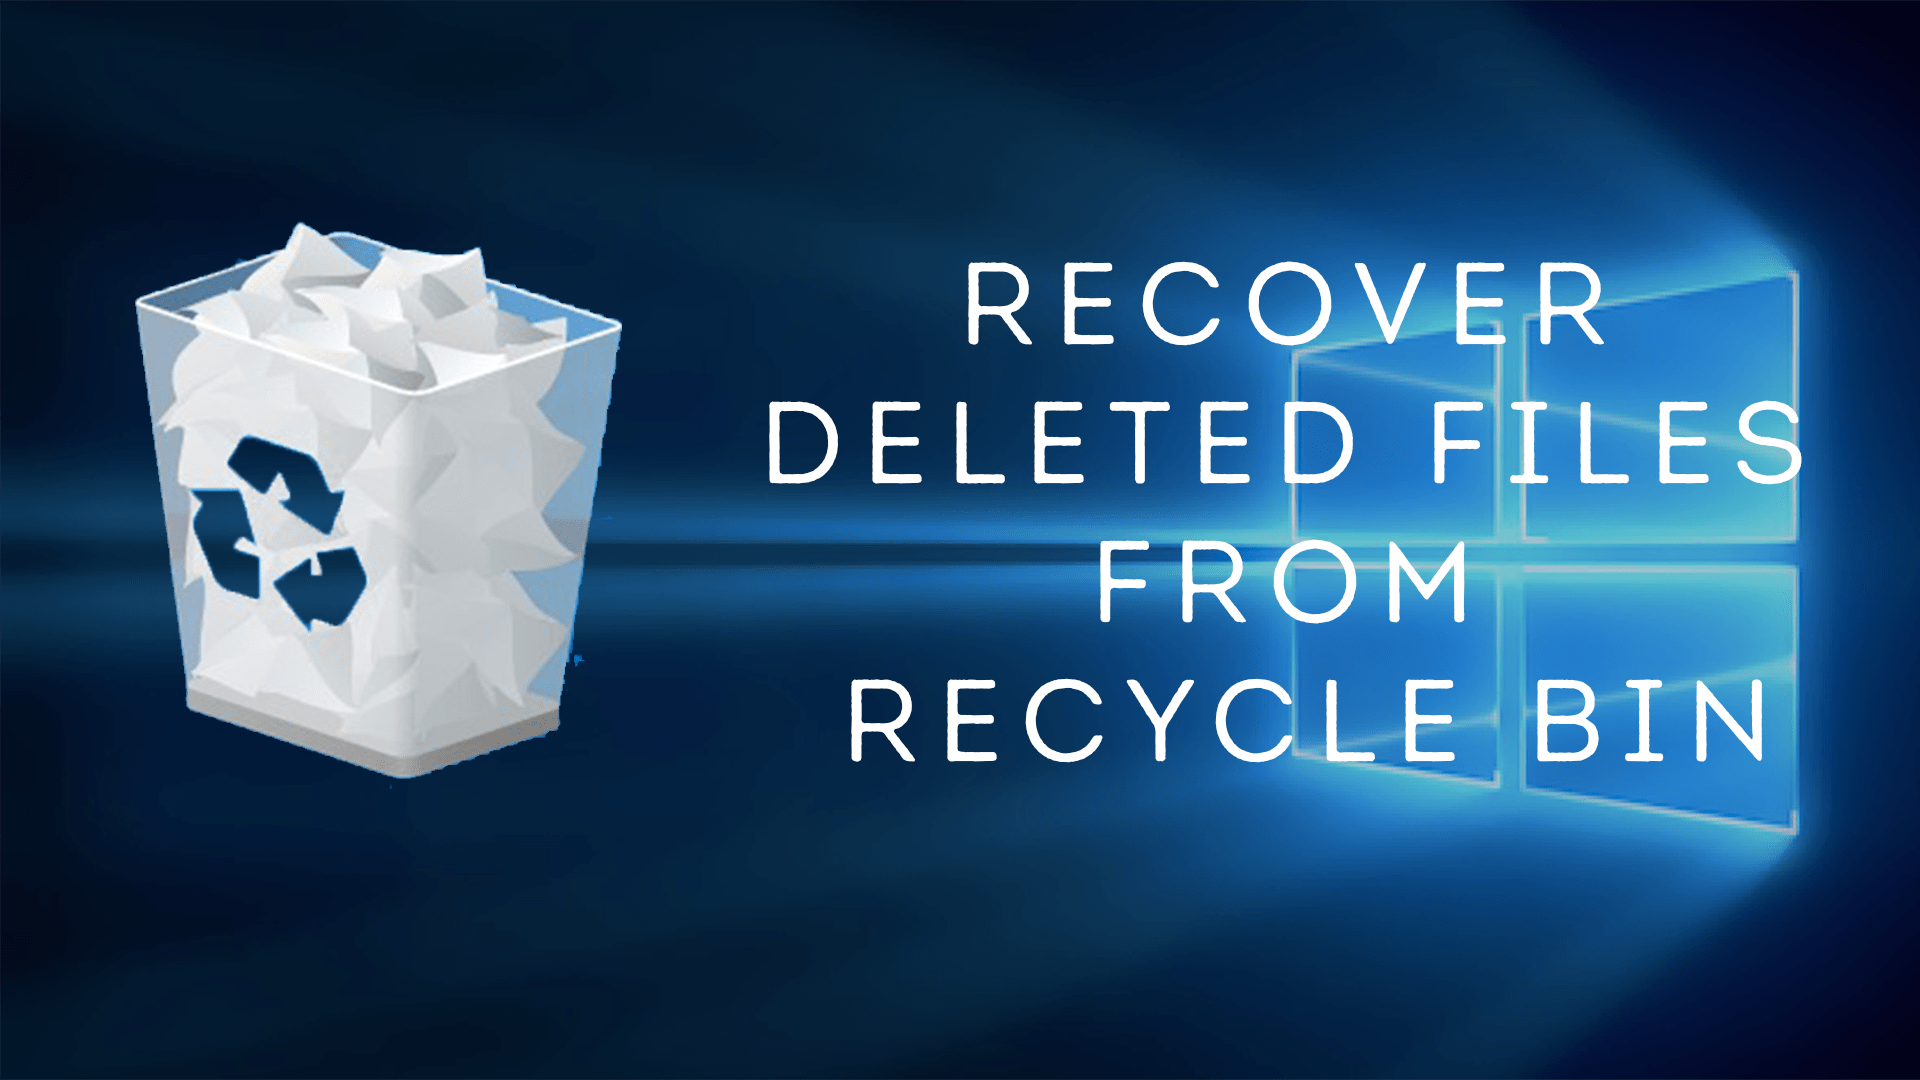 Recovered us. Корзина Windows. Recycle bin Windows 10. Корзина Windows 10. Recycle bin Windows 10 PNG.